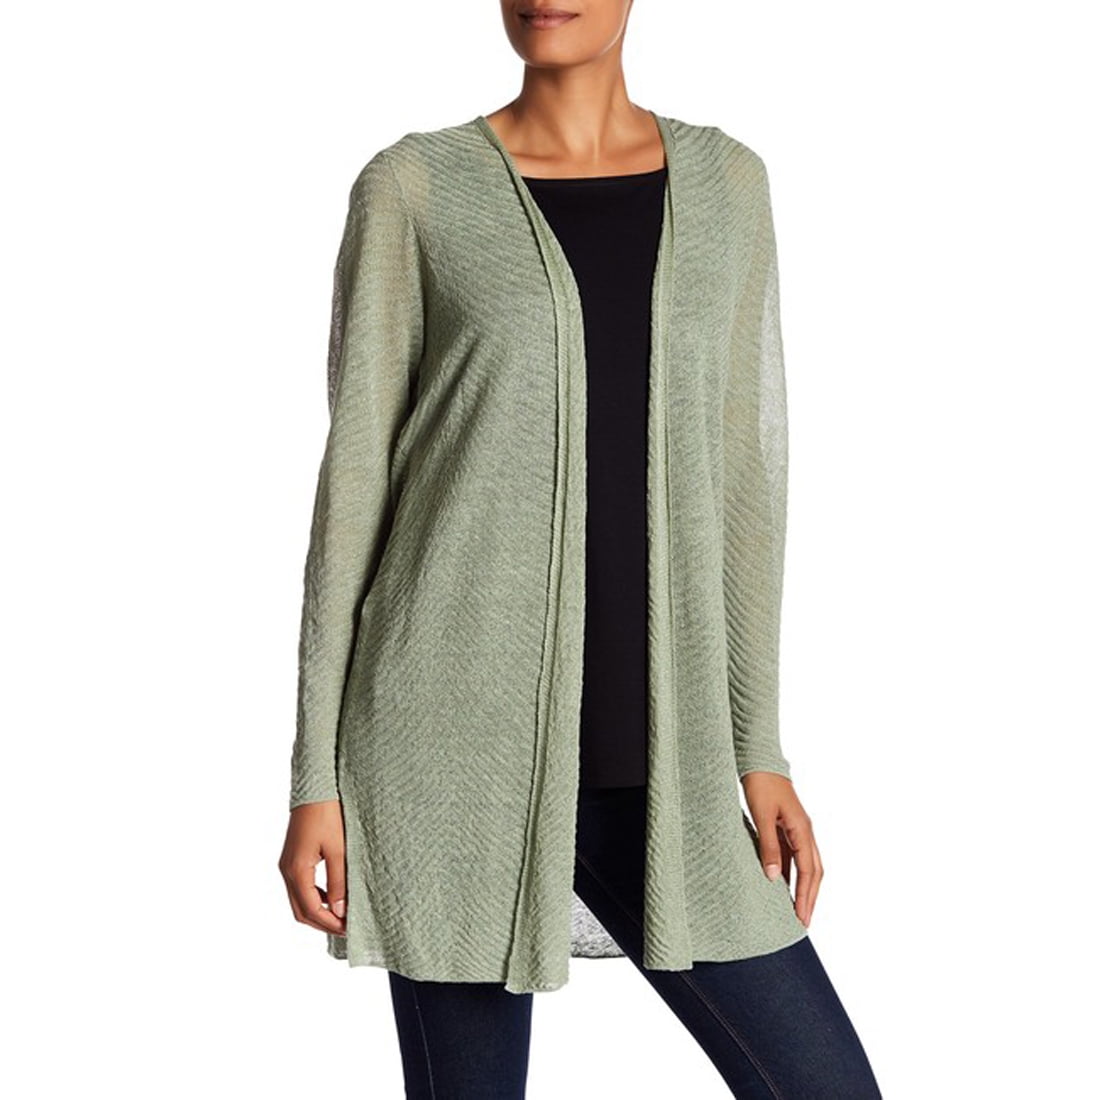 mobile Gather ticket Eileen Fisher Simple Knit Cardigan, Sea, Small - Walmart.com